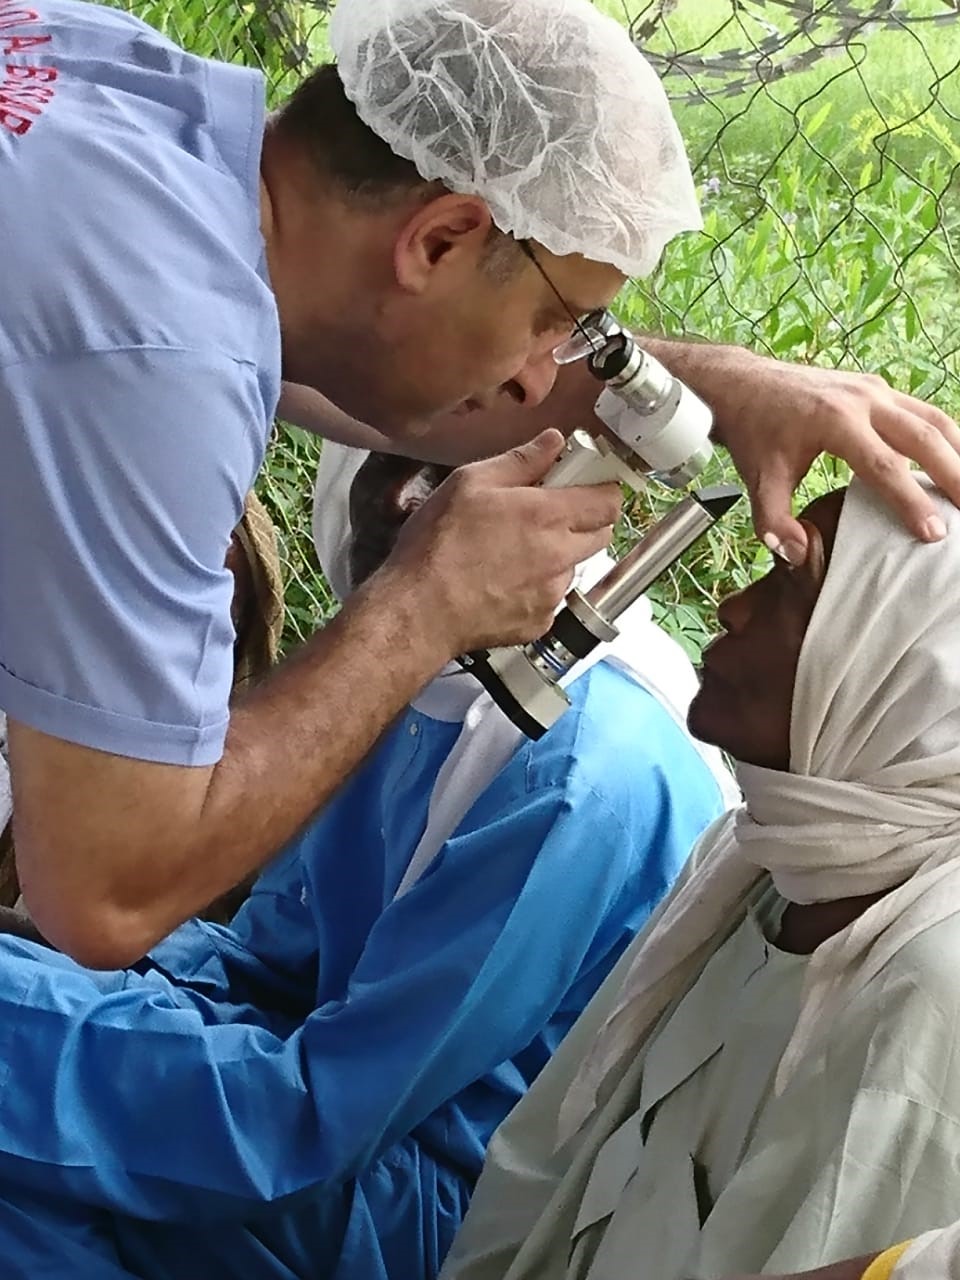 The Palestinian-Tunisian medical team to the Republic of Chad completes a successful mission with 1,016 surgeries in fight of avoidable blindness